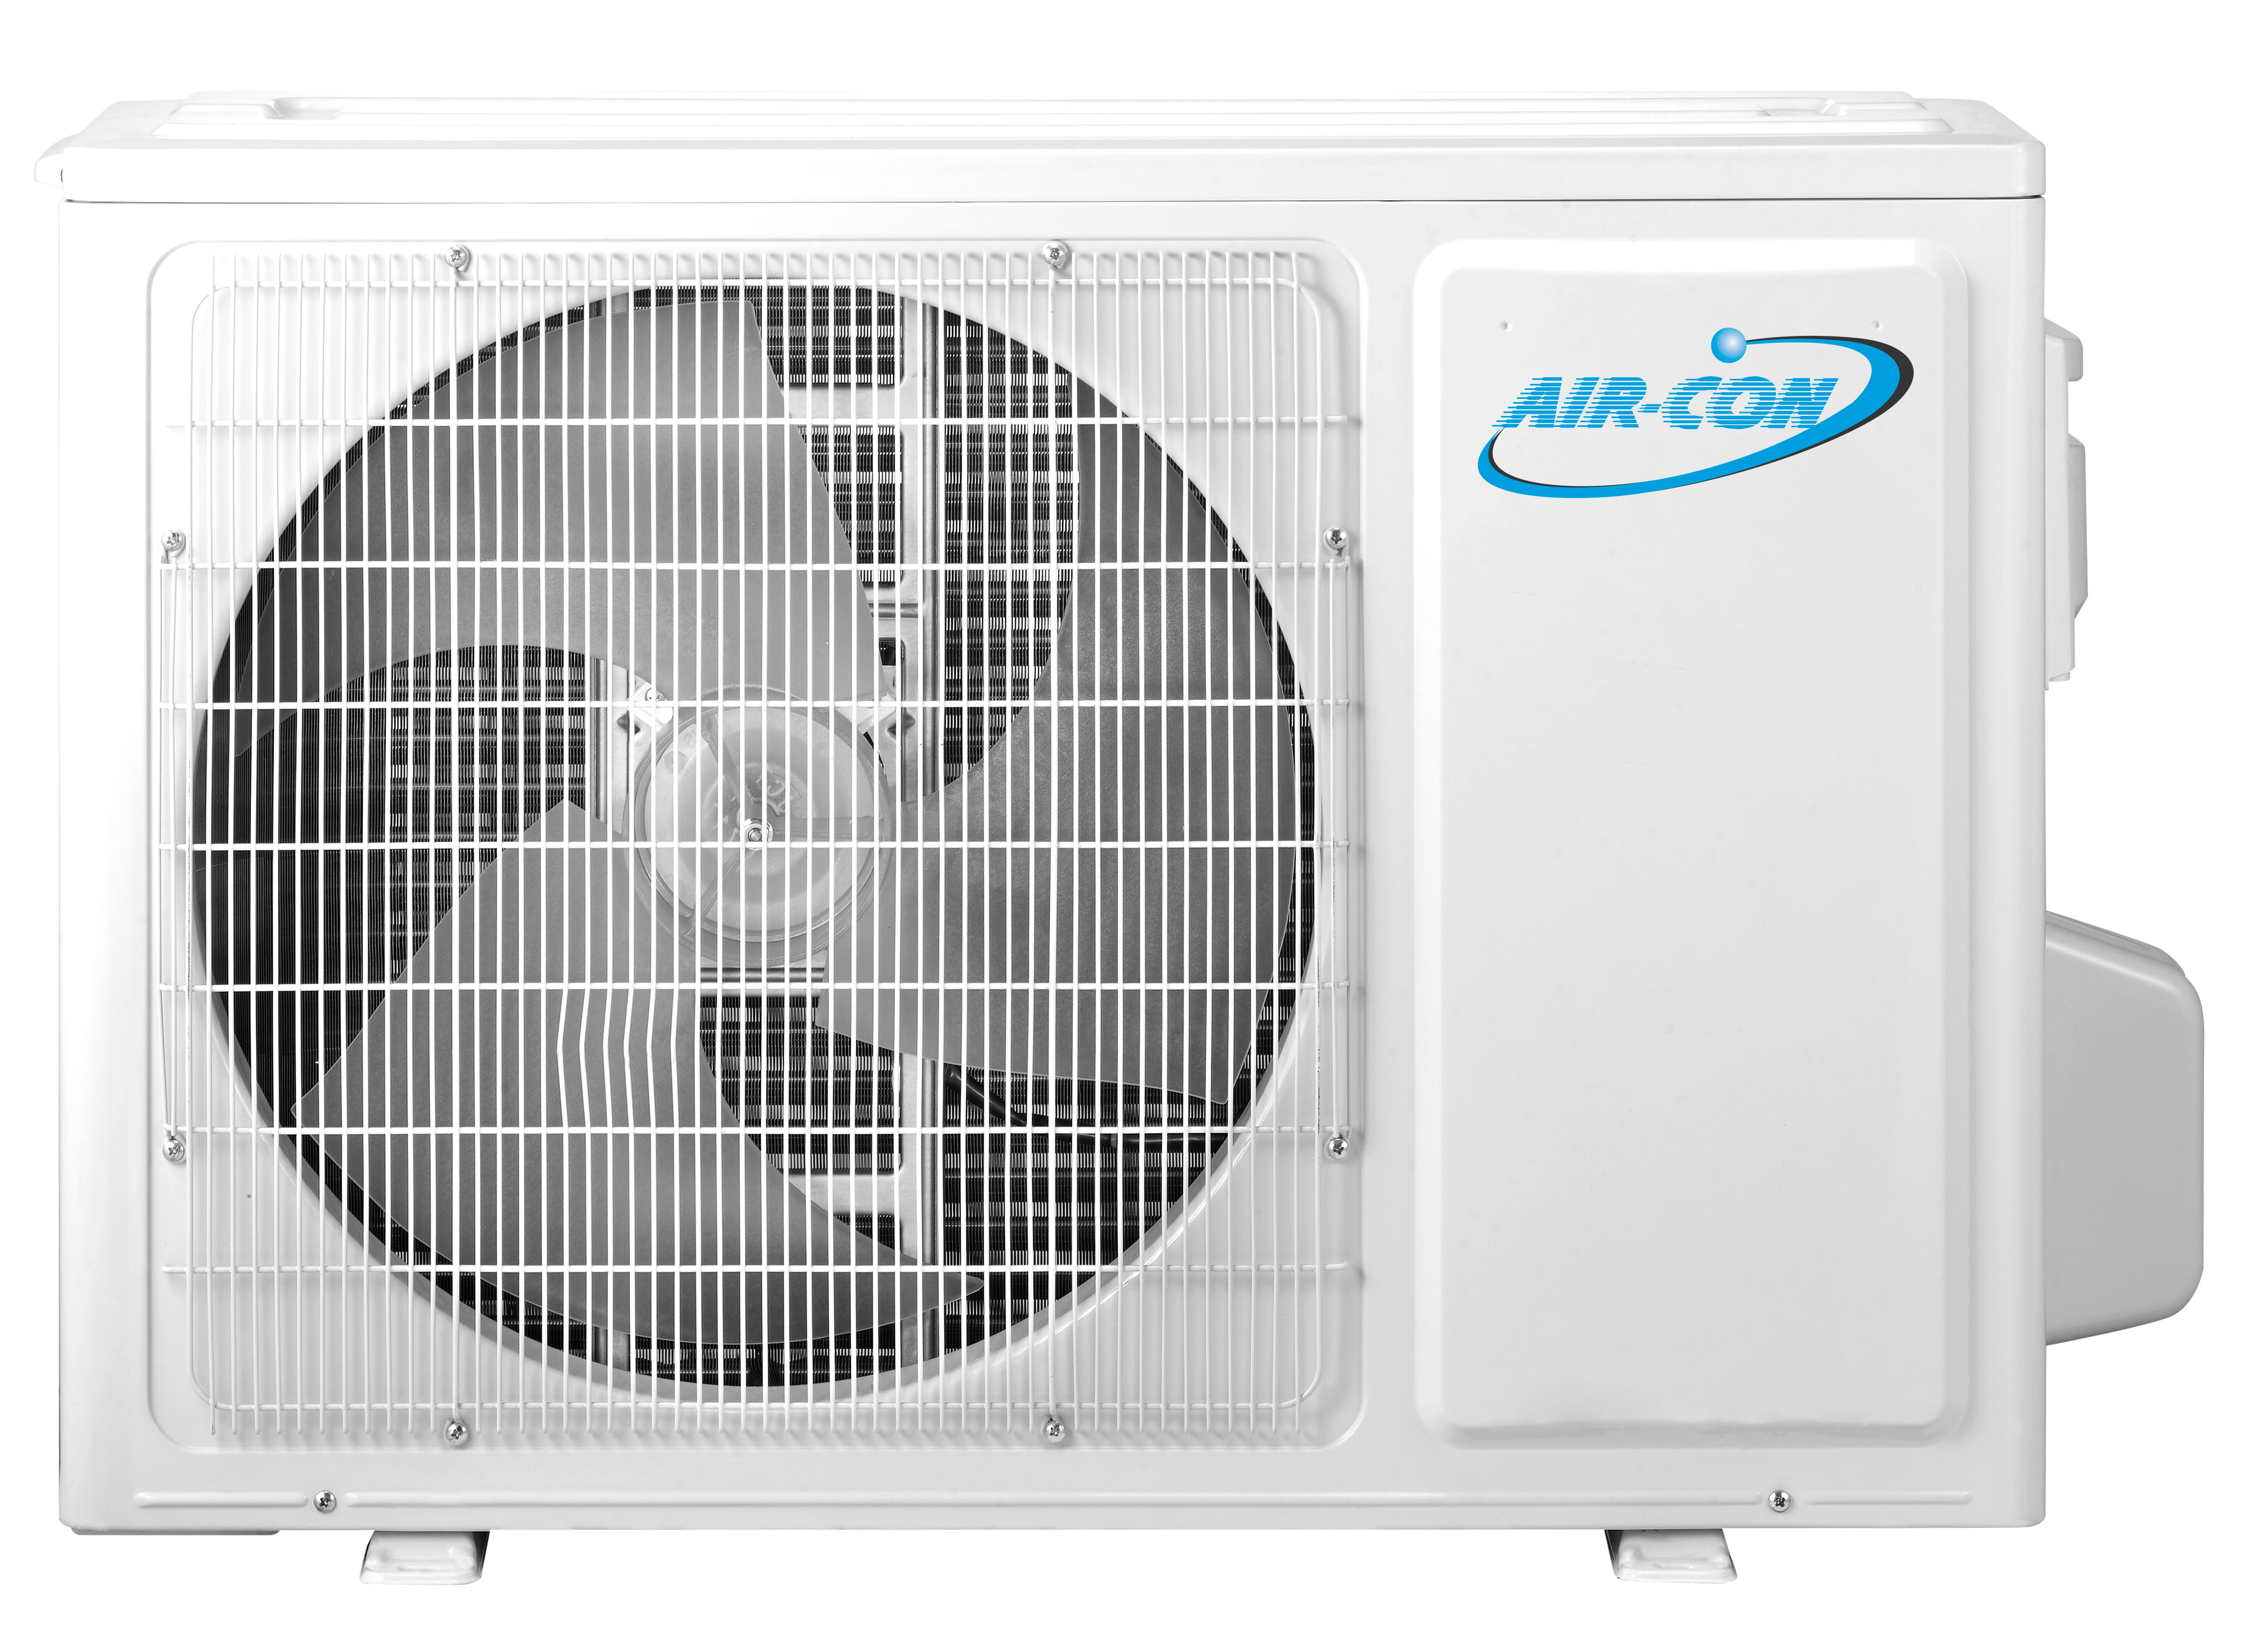 Air-Con Serene Series 9,000 BTU 16.3 SEER Single Zone Ductless Mini Split Air Conditioner and Heater System